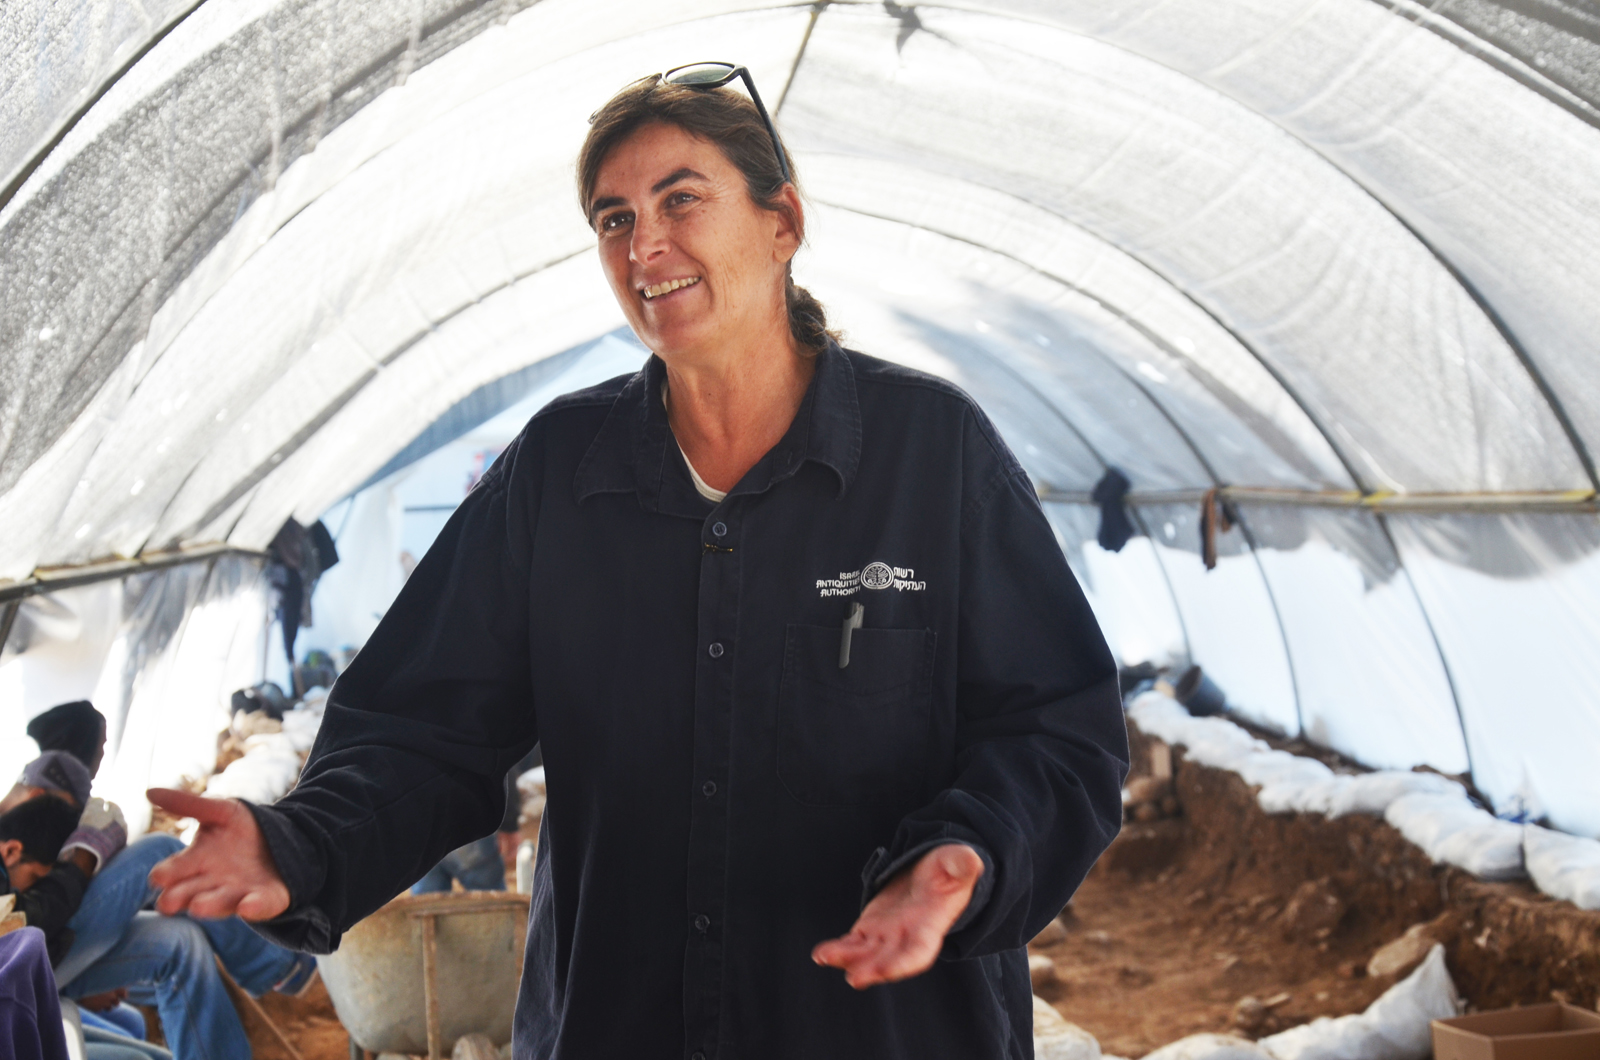 Dr. Rina Avner, excavation director on behalf of the Israel Antiquities Authority, in Jerusalem. Photo by Yoli Shwartz/Israel Antiquities Authority